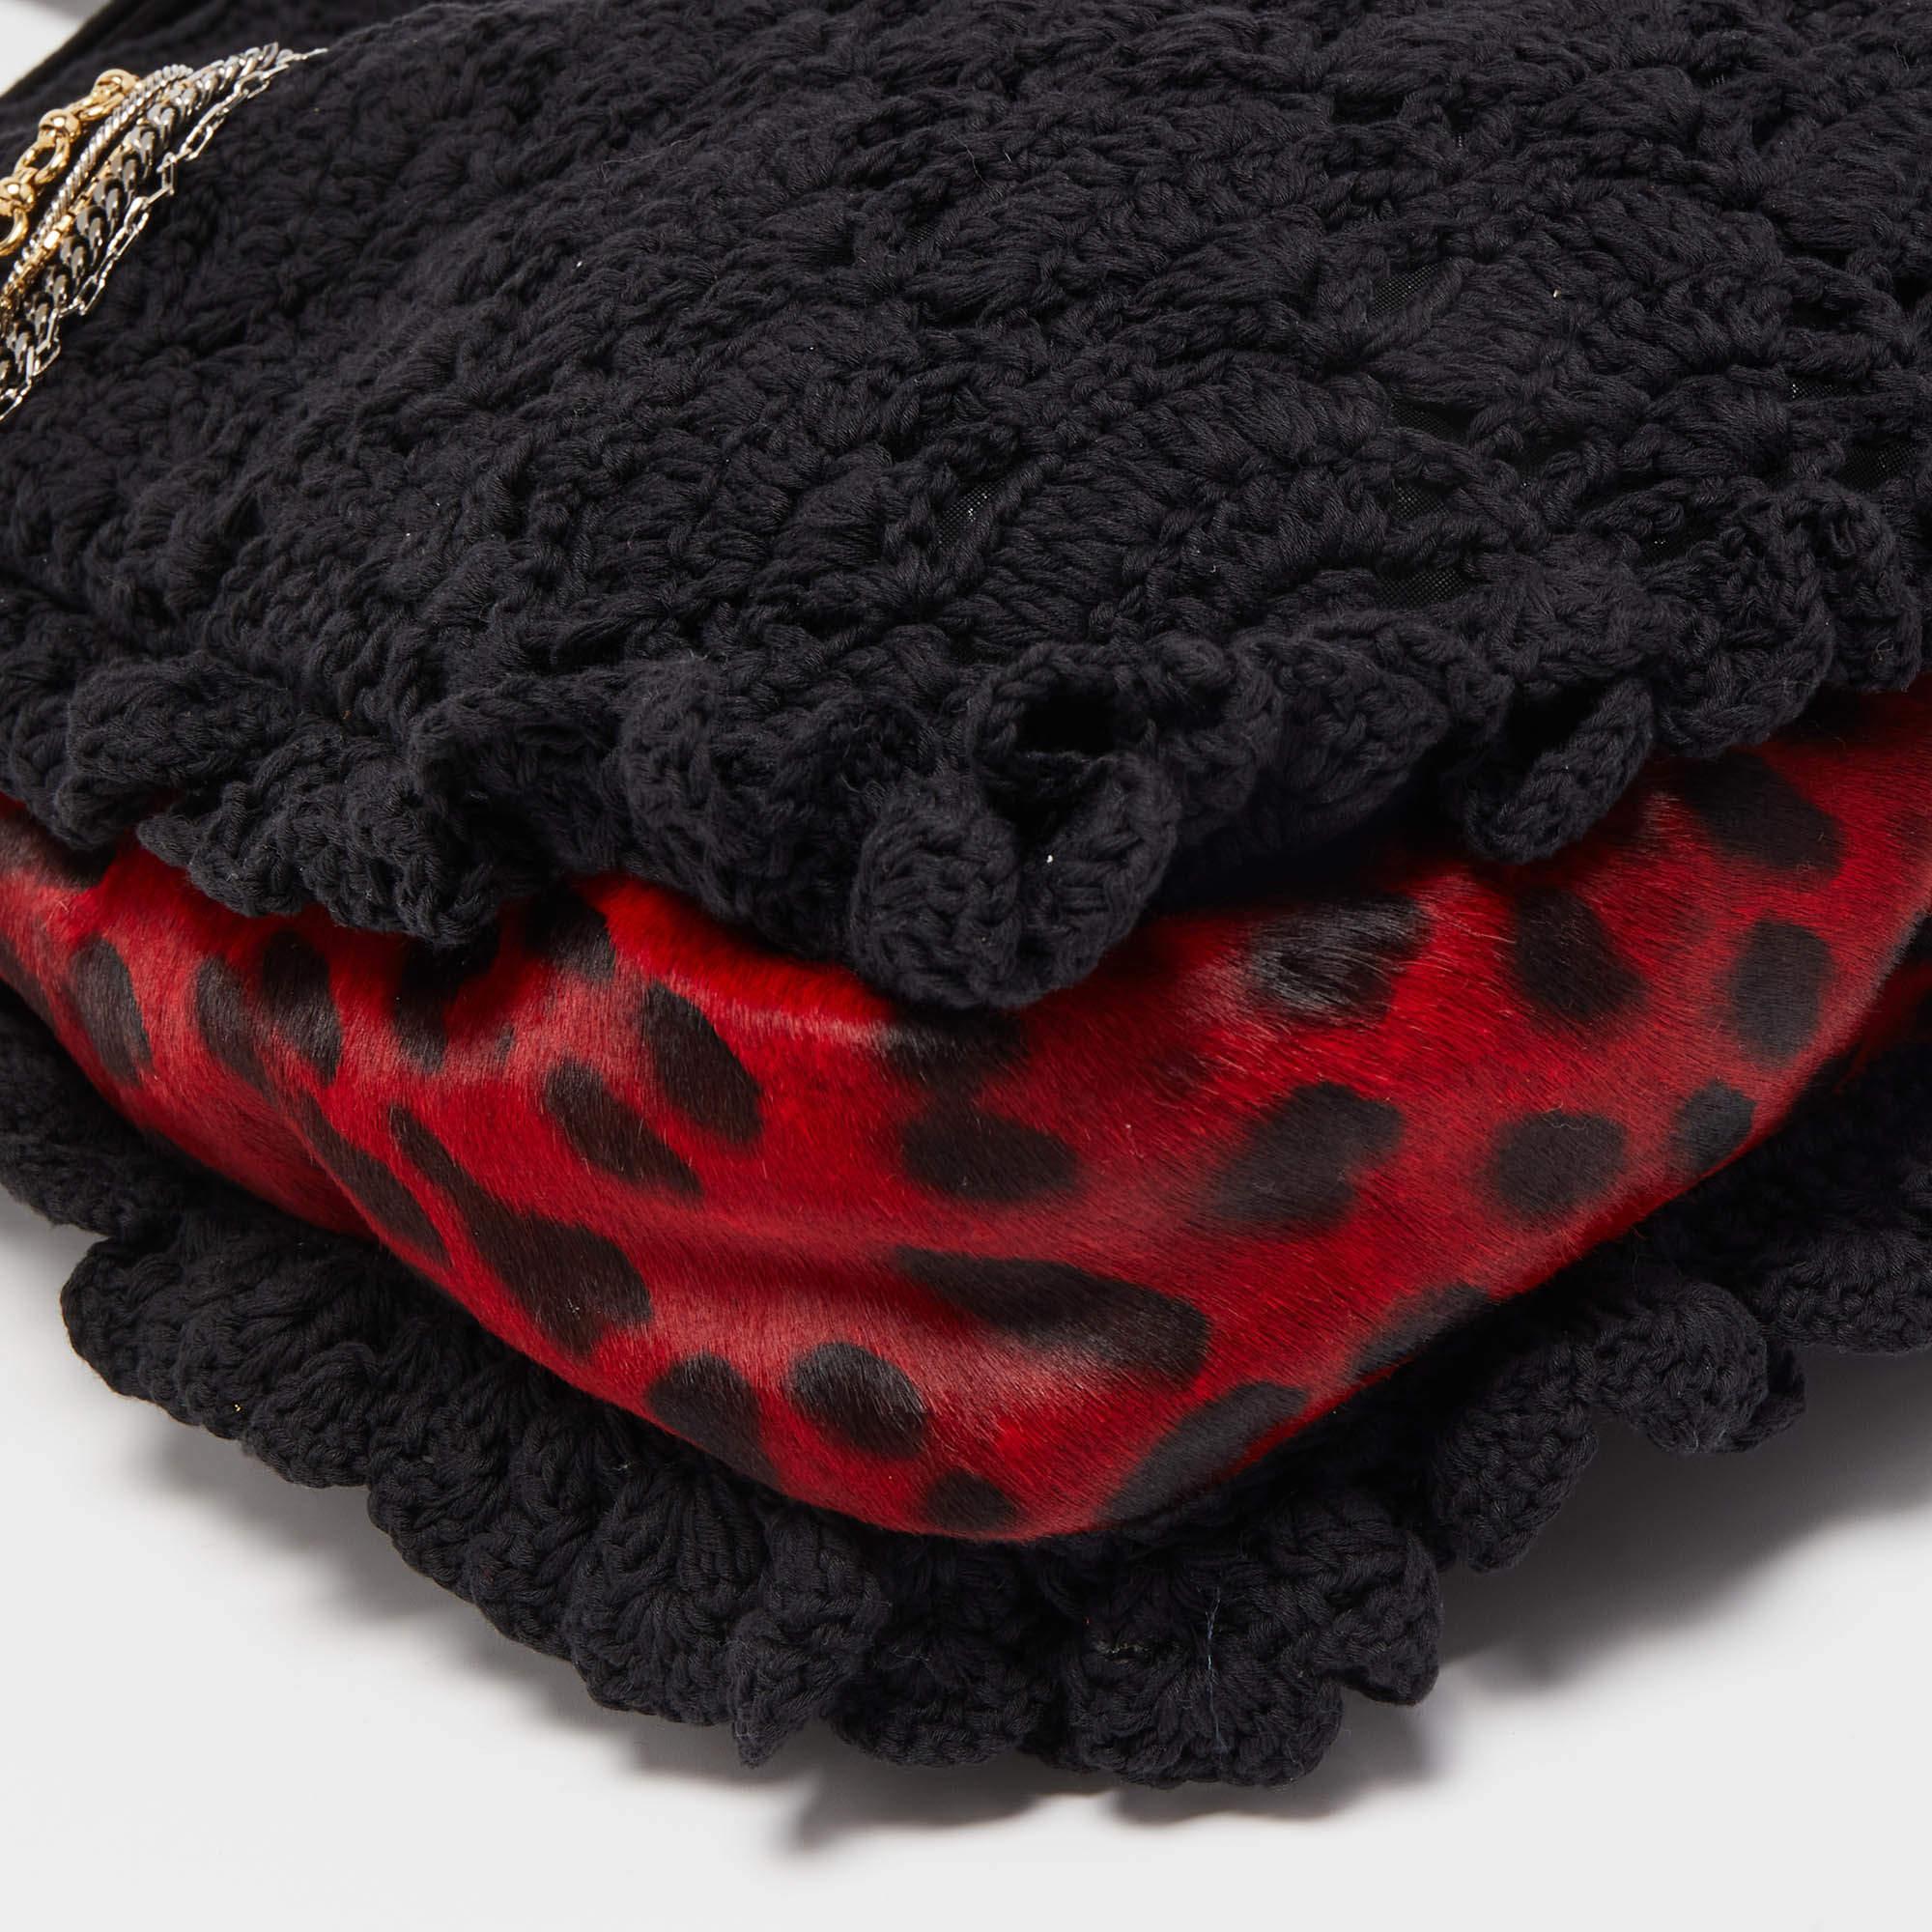 Dolce & Gabbana Black/Red Crochet and Leopard Print Calf Hair Tote For Sale 2